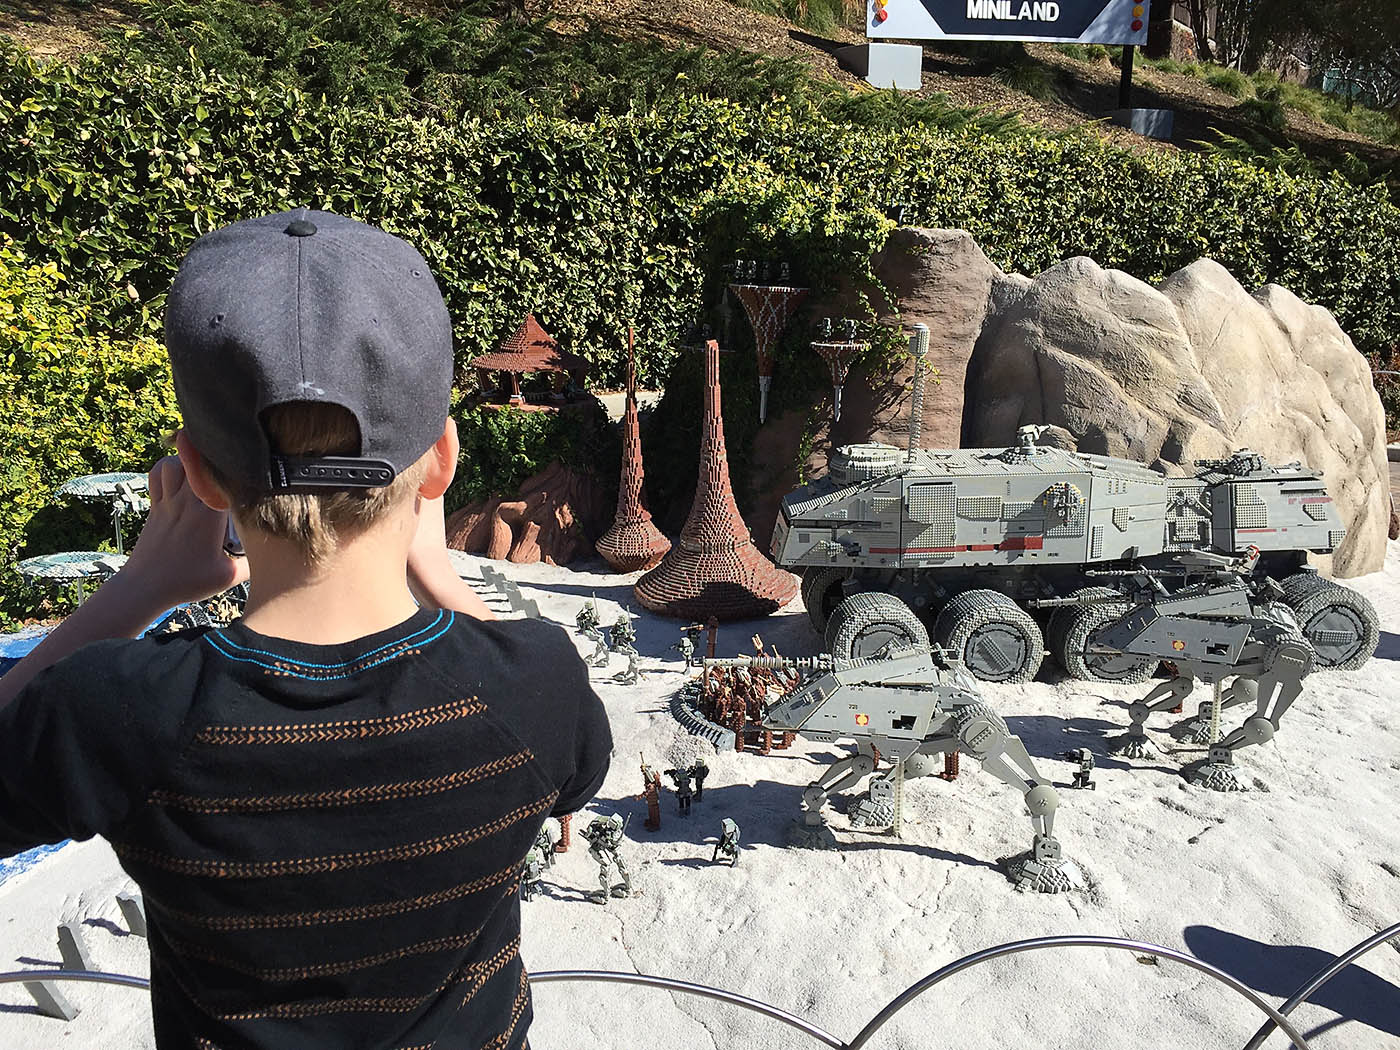 What to do with older kids (tweens and teens too) at LEGOLAND California